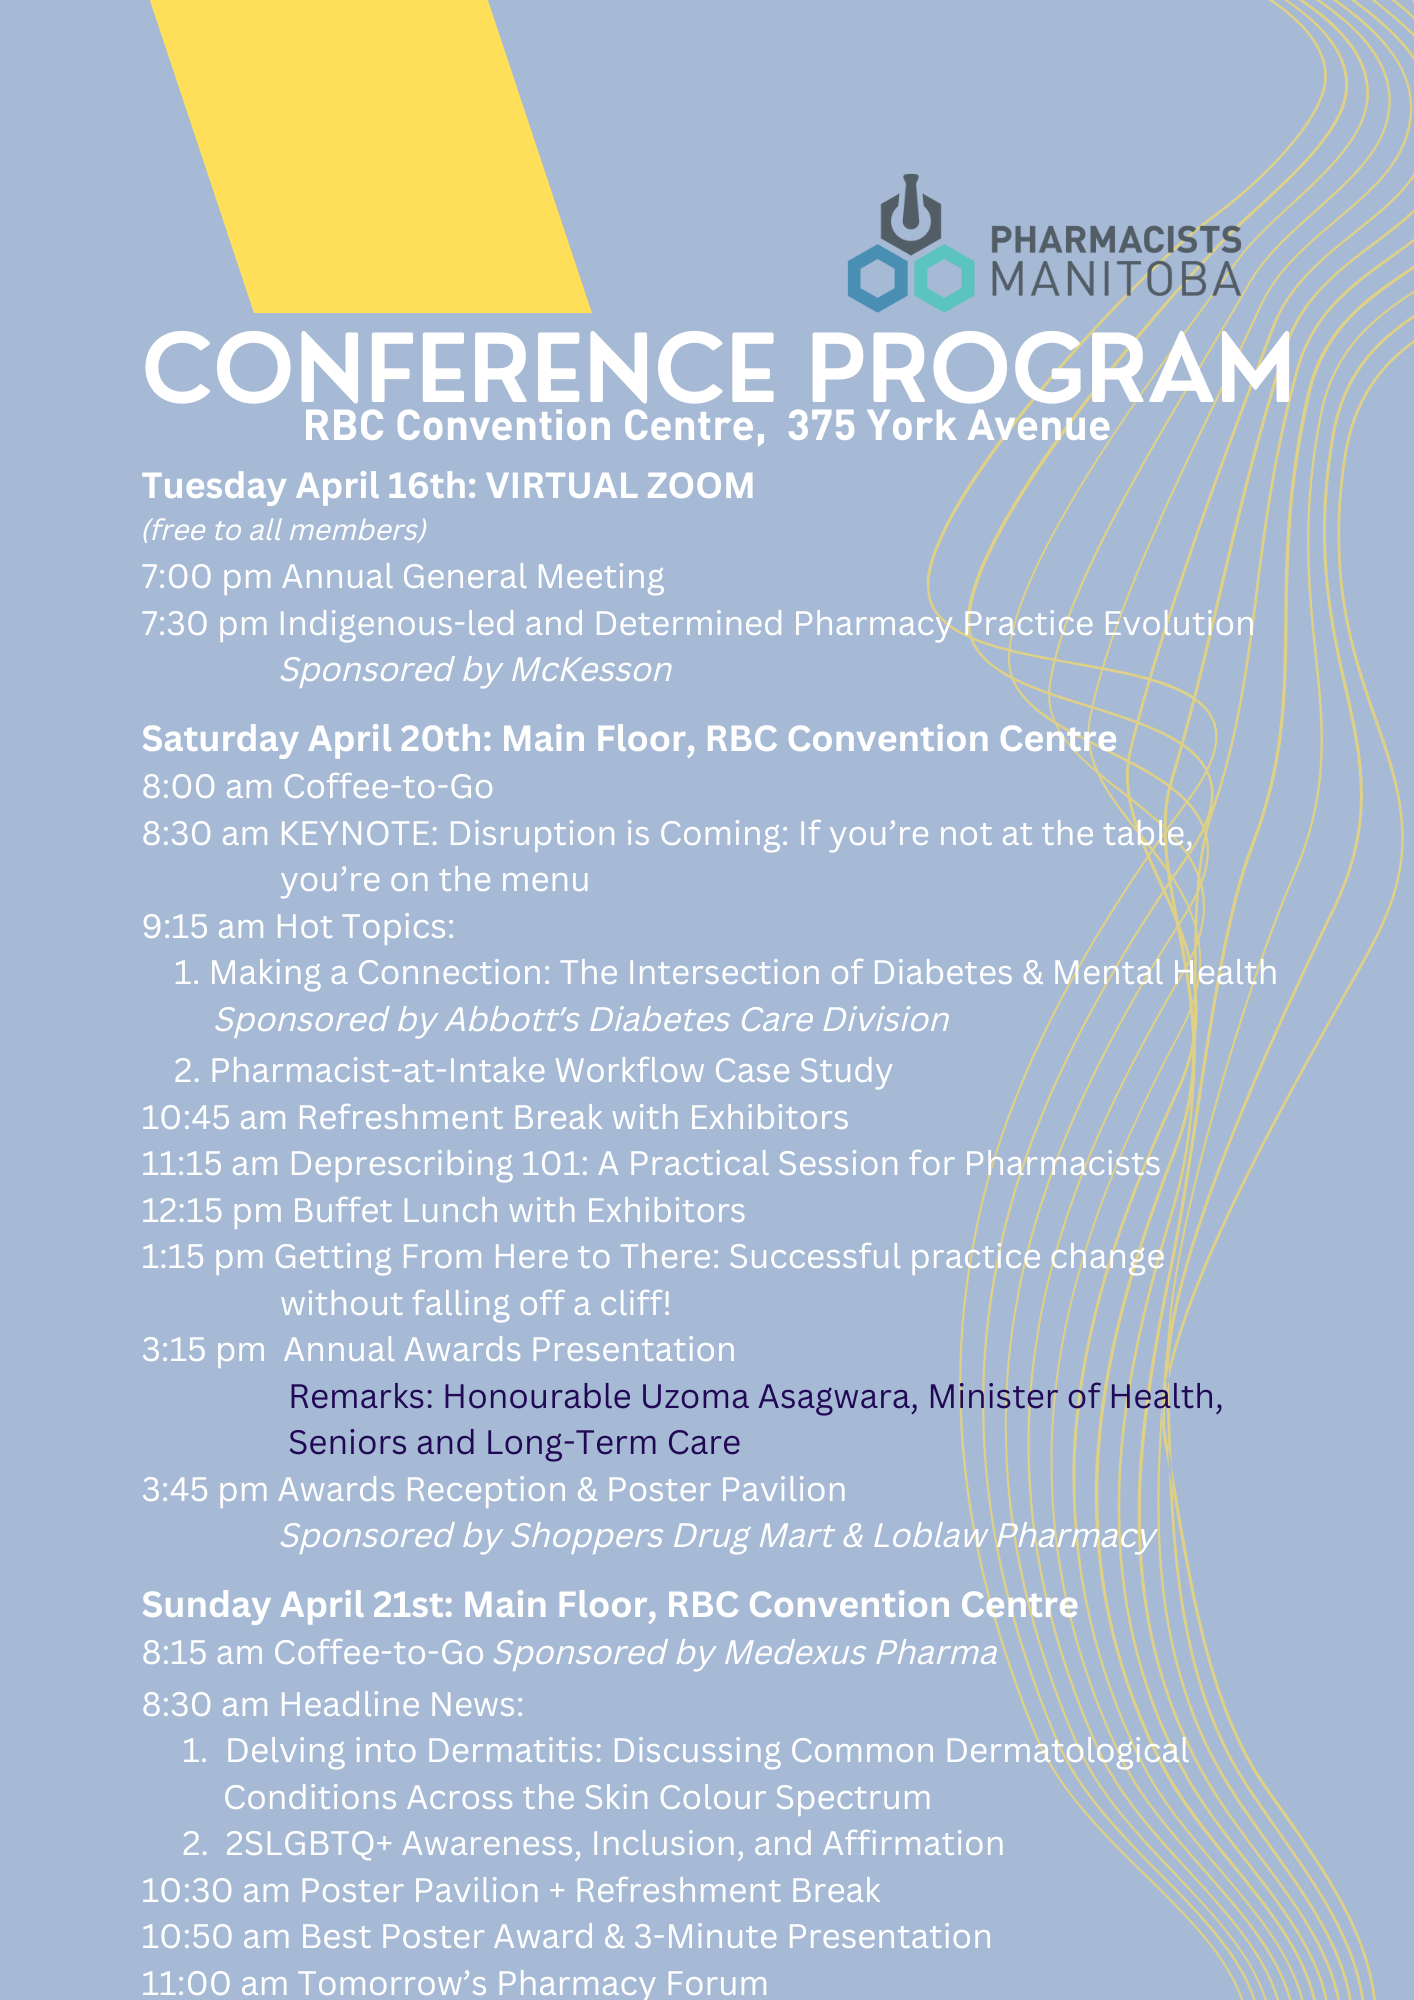  PHARMACISTS MANITOBA CONFERENCE PROGRAM RBC Convention Centre, 375 York Avenue Tuesday April 16th: VIRTUAL ZOOM (free to all members) 7:00 pm Annual General Meeting 7:30 pm Indigenous-led and Determined Pharmacy Practice Evolution Sponsored by McKesson Saturday April 20th: Main Floor, RBC Convention Centre 8:00 am Coffee-to-Go 8:30 am KEYNOTE: Disruption is Coming: If you're not at the table, you're on the menu 9:15 am Hot Topics: 1. Making a Connection: The Intersection of Diabetes & Mental Health Sponsored by Abbott's Diabetes Care Division 2. Pharmacist-at-Intake Workflow Case Study 10:45 am Refreshment Break with Exhibitors 11:15 am Deprescribing 101: A Practical Session for Pharmacists 12:15 pm Buffet Lunch with Exhibitors 1:15 pm Getting From Here to There: Successful practice change without falling off a cliff! 3:15 pm Annual Awards Presentation Remarks: Honourable Uzoma Asagwara, Minister of Health, Seniors and Long-Term Care 3:45 pm Awards Reception & Poster Pavilion Sponsored by Shoppers Drug Mart & Loblaw Pharmacy Sunday April 21st: Main Floor, RBC Convention Centre 8:15 am Coffee-to-Go Sponsored by Medexus Pharma 8:30 am Headline News: 1. Delving into Dermatitis: Discussing Common Dermatological Conditions Across the Skin Colour Spectrum 2. 2SLGBTQ+ Awareness, Inclusion, and Affirmation 10:30 am Poster Pavilion + Refreshment Break 10:50 am Best Poster Award & 3-Minute Presentation 11:00 am Tomorrow's Pharmacy Forum